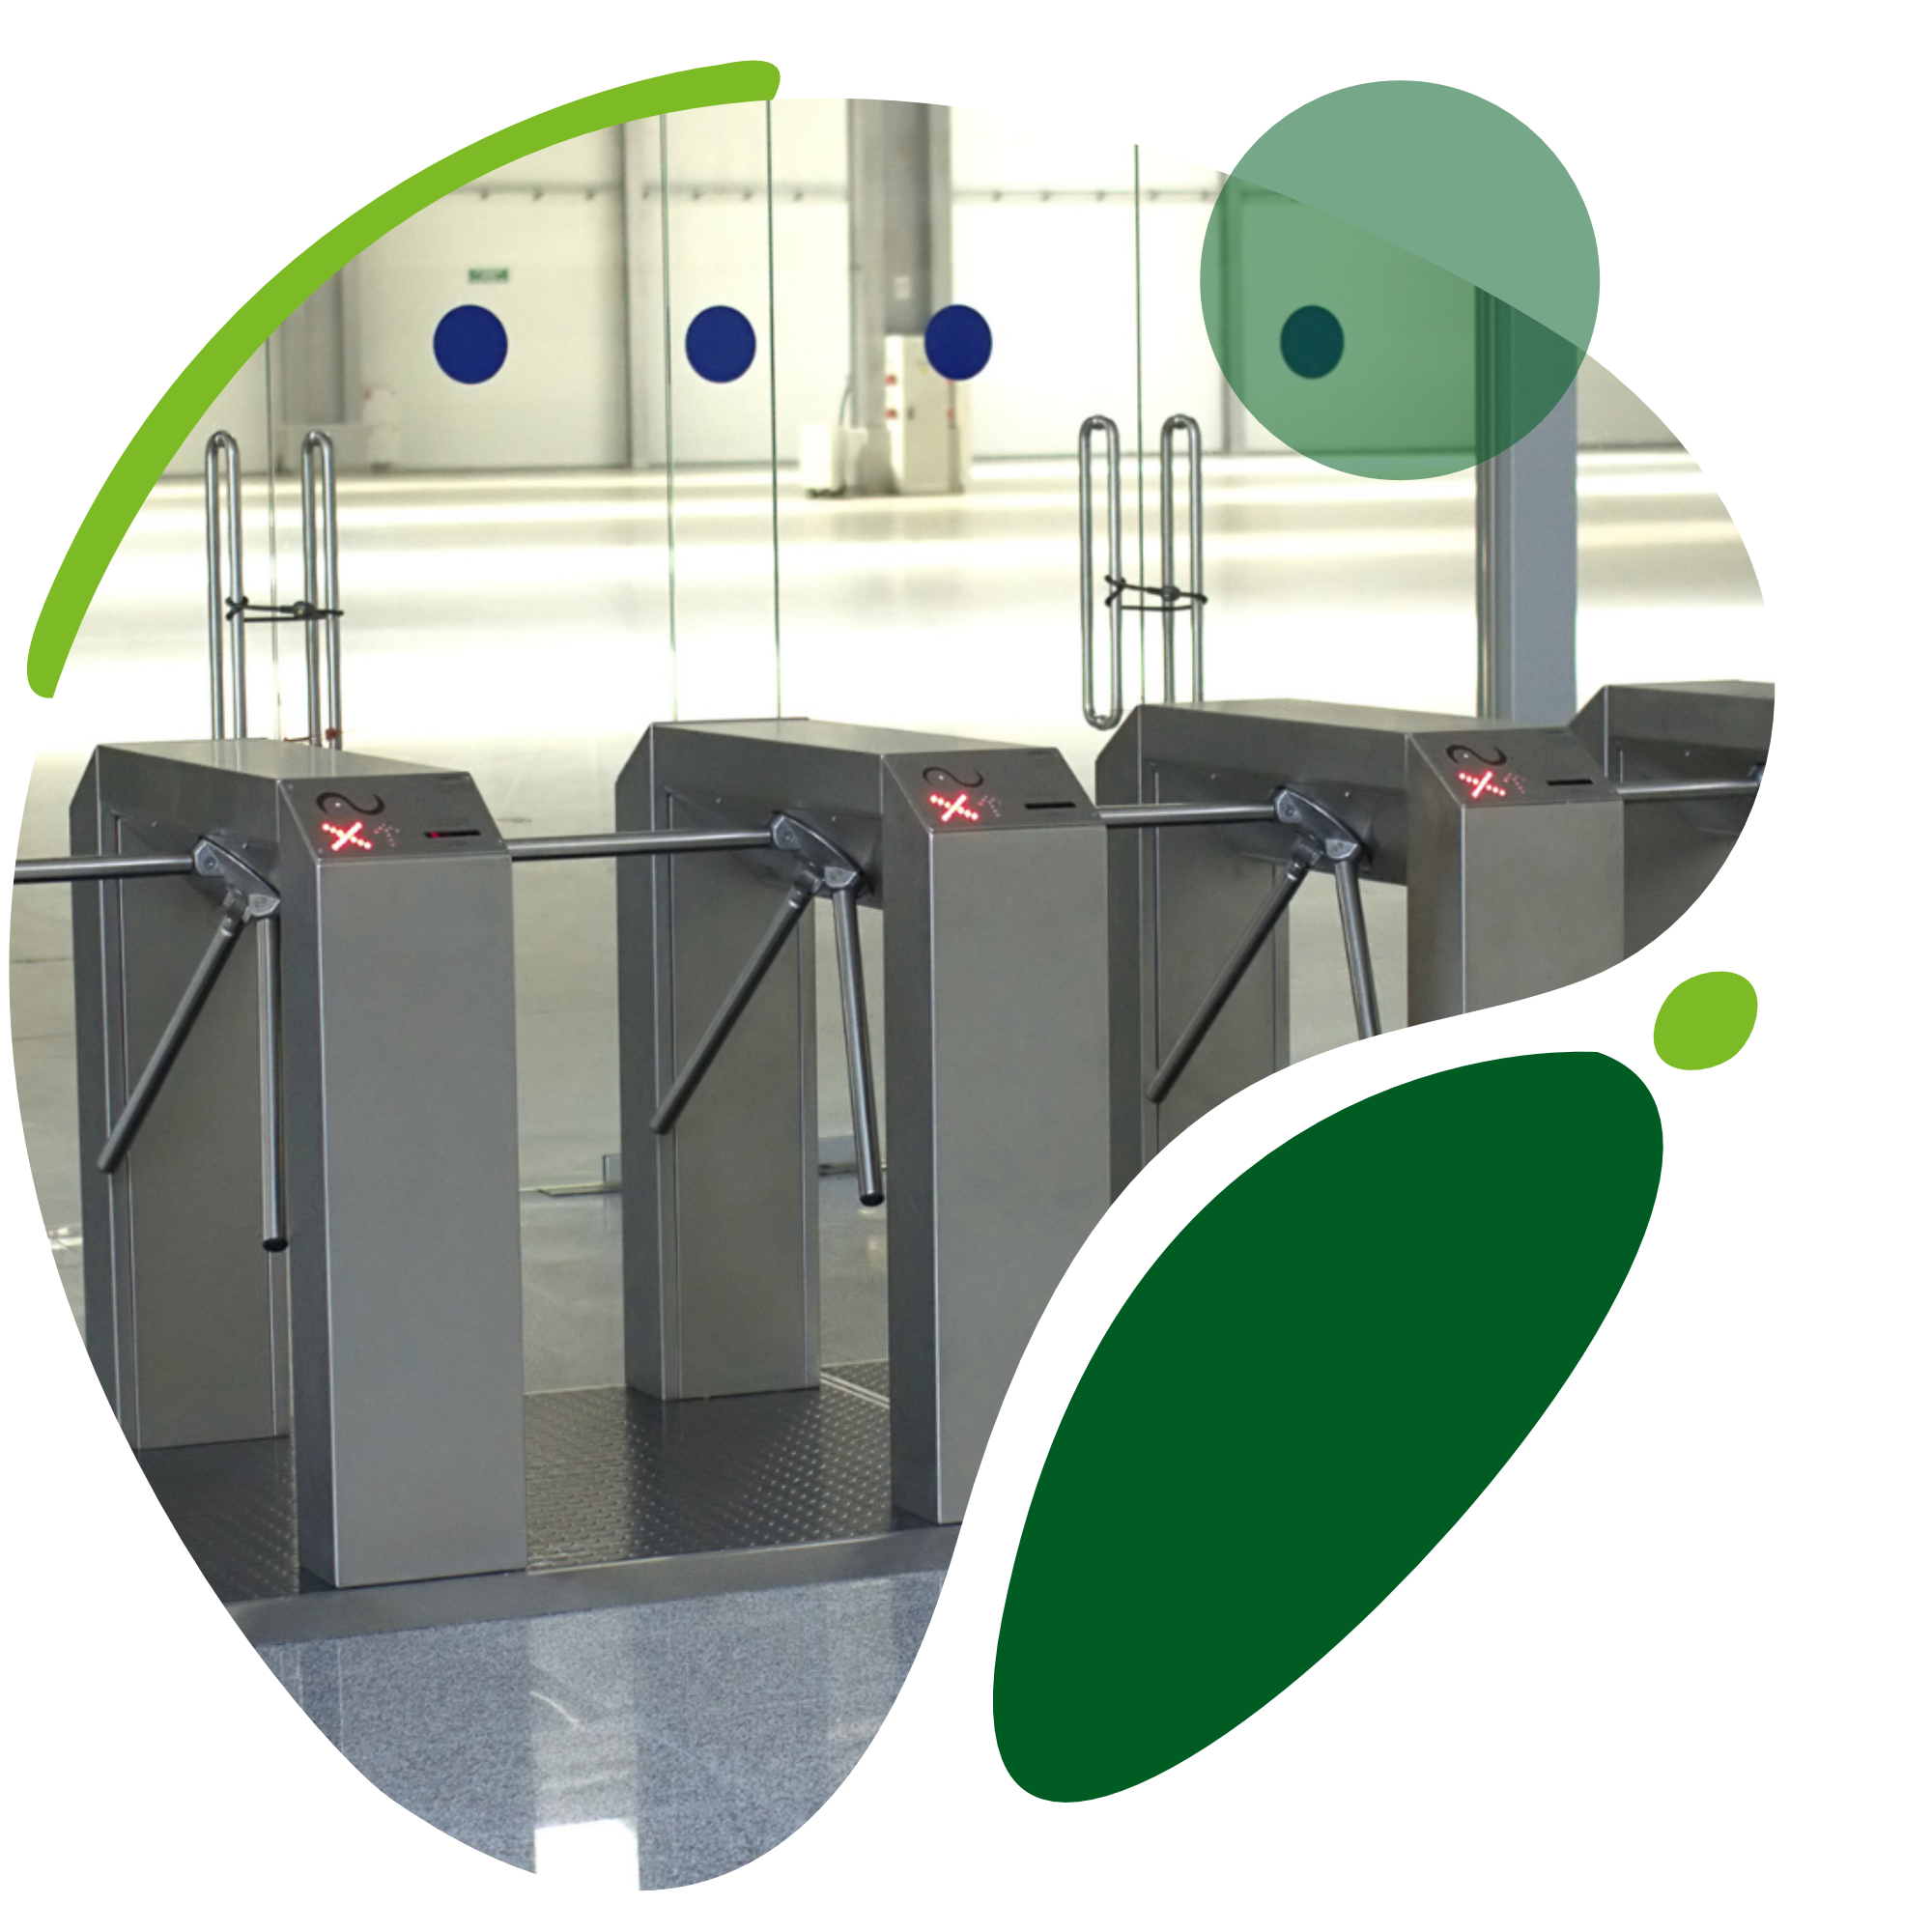 Turnstiles to manage the entry in your workplace or commercial premises